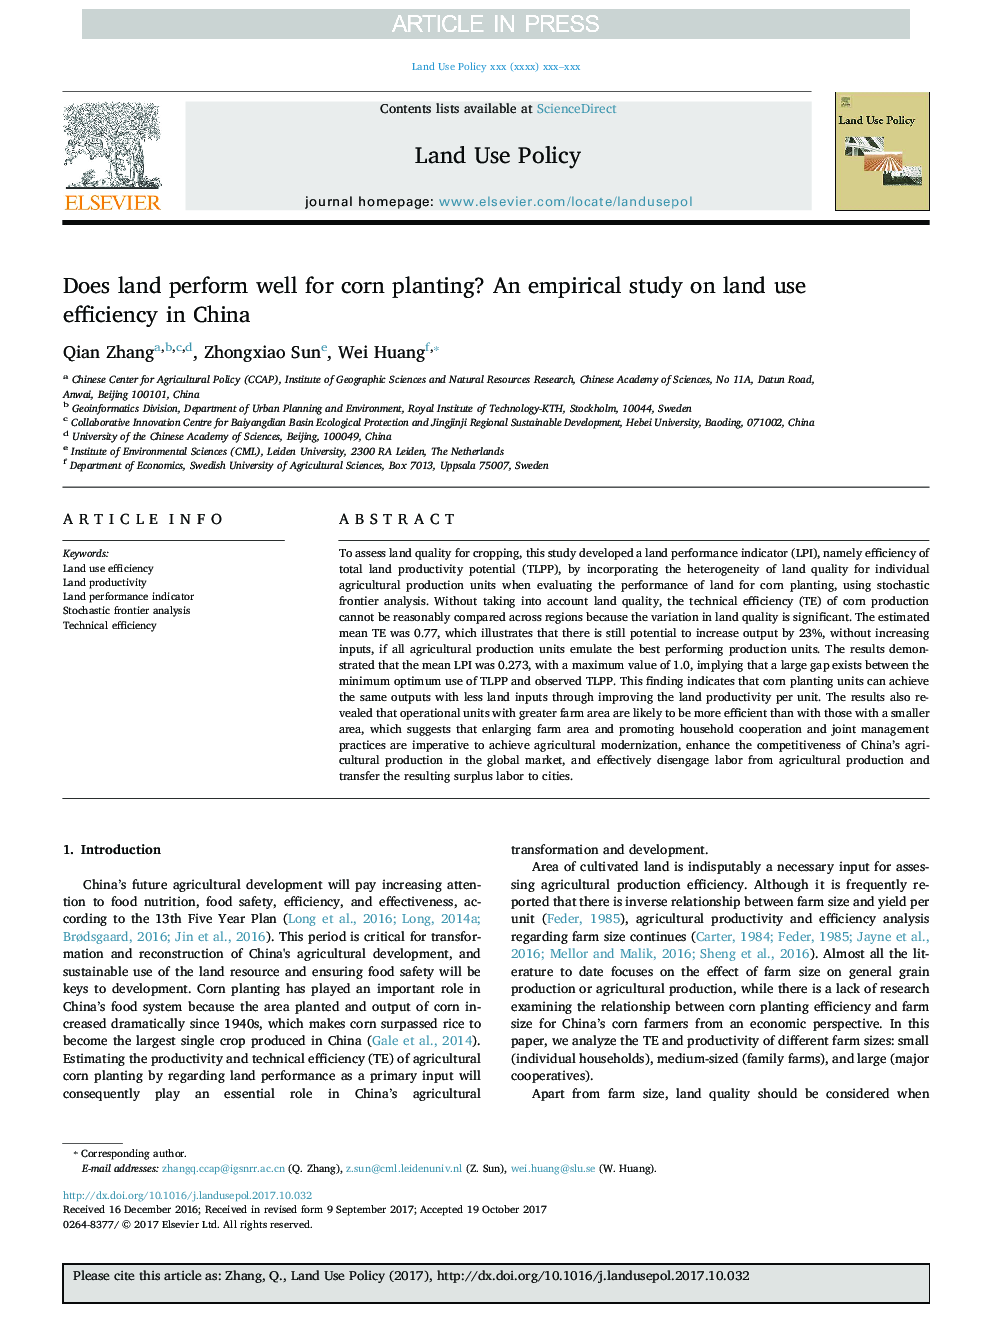 Does land perform well for corn planting? An empirical study on land use efficiency in China